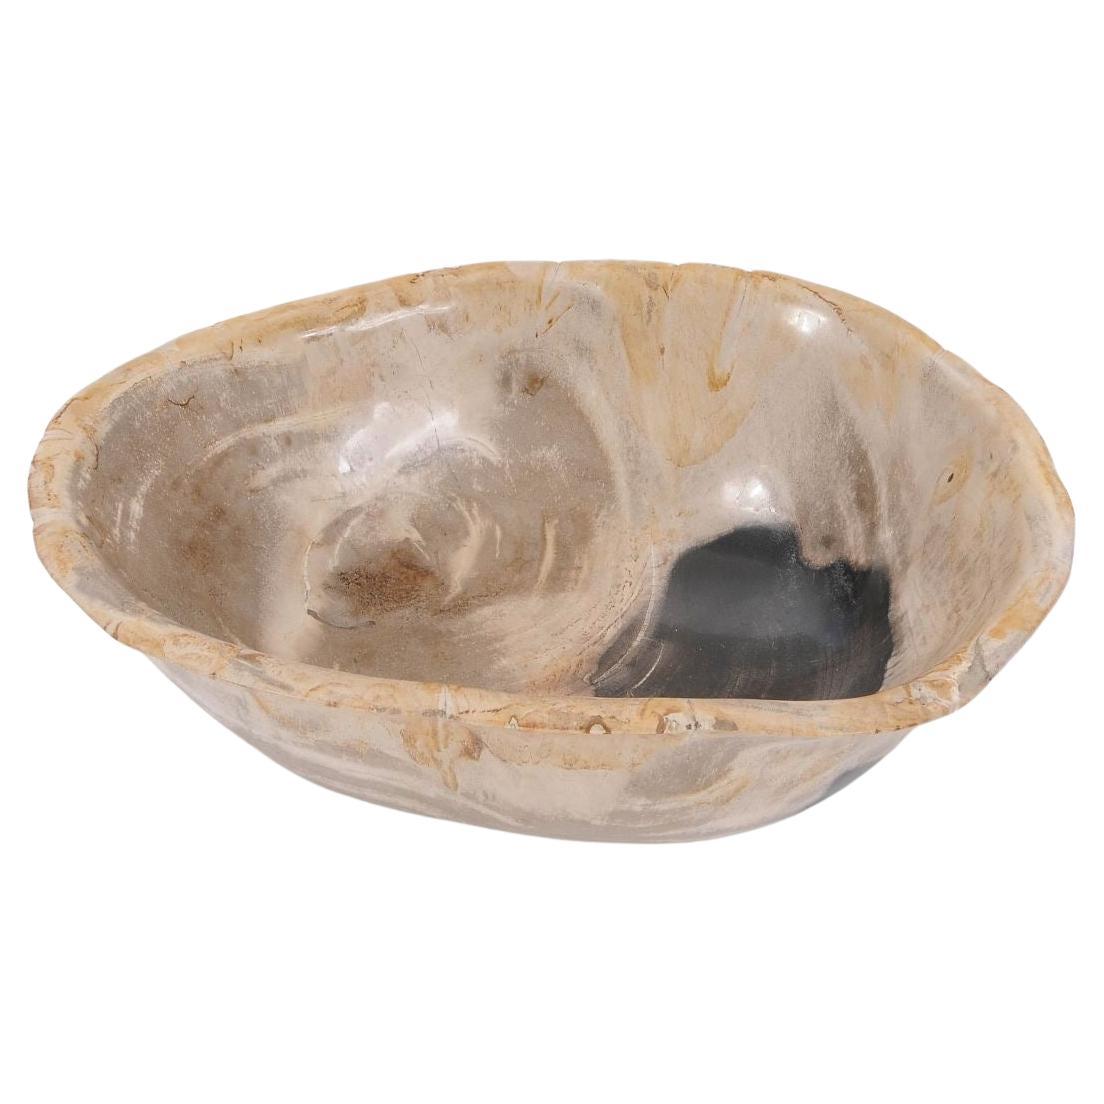 Beige With Black Accents Large Petrified Wood Bowl, Indonesia, Contemporary